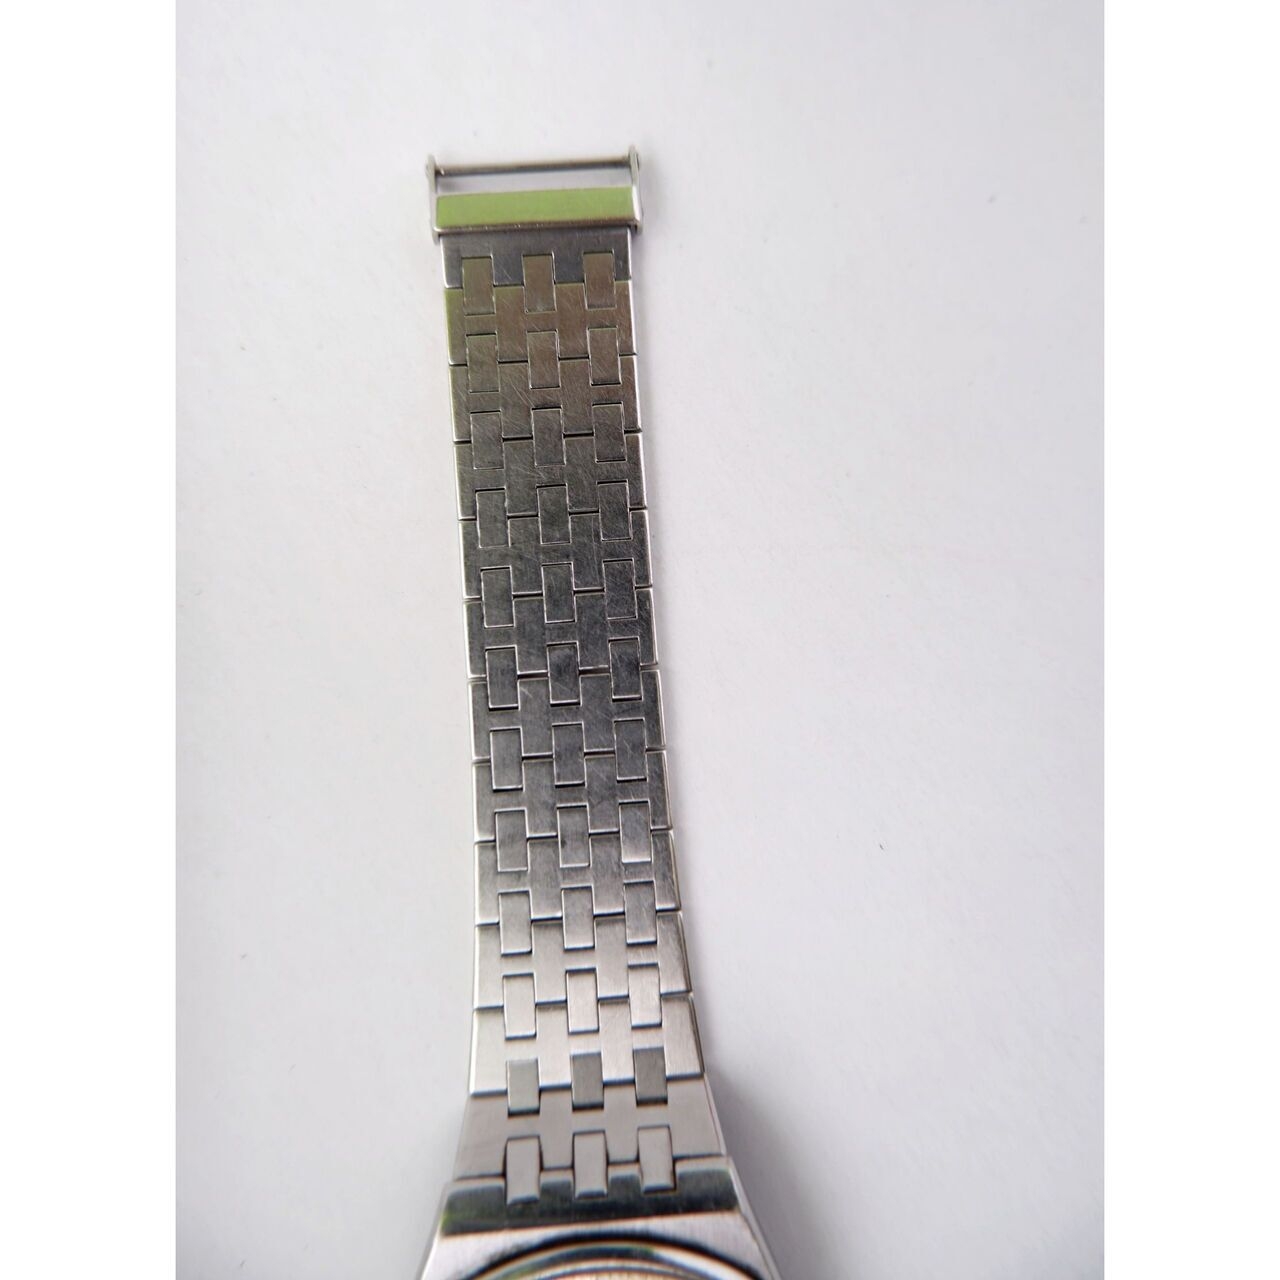 Omega Silver Watch